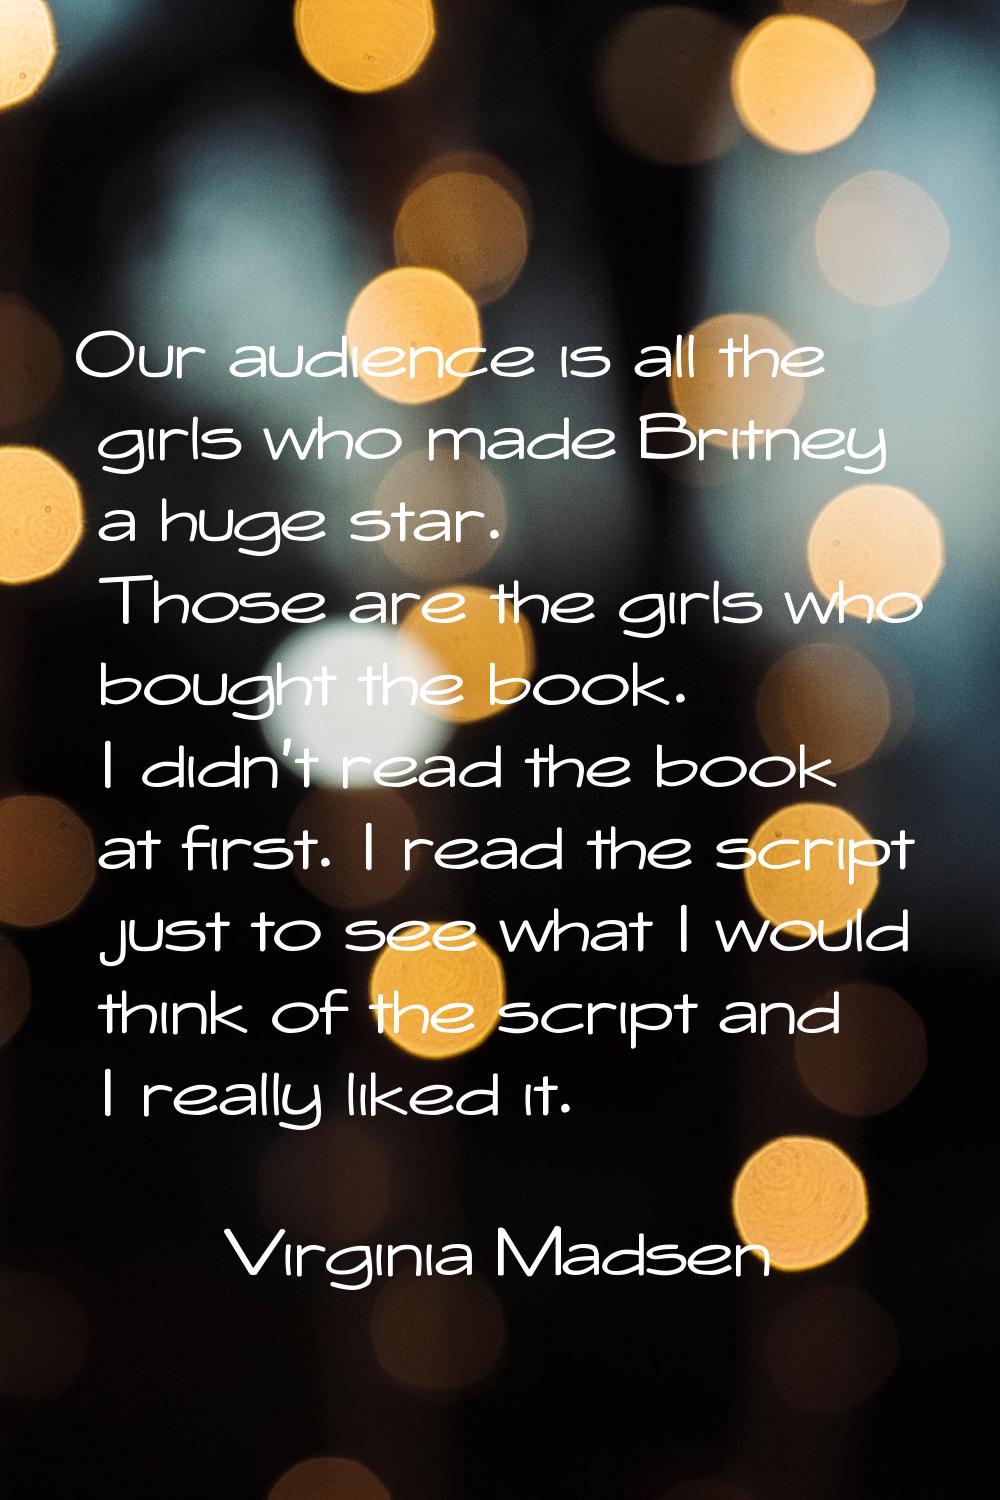 Our audience is all the girls who made Britney a huge star. Those are the girls who bought the book